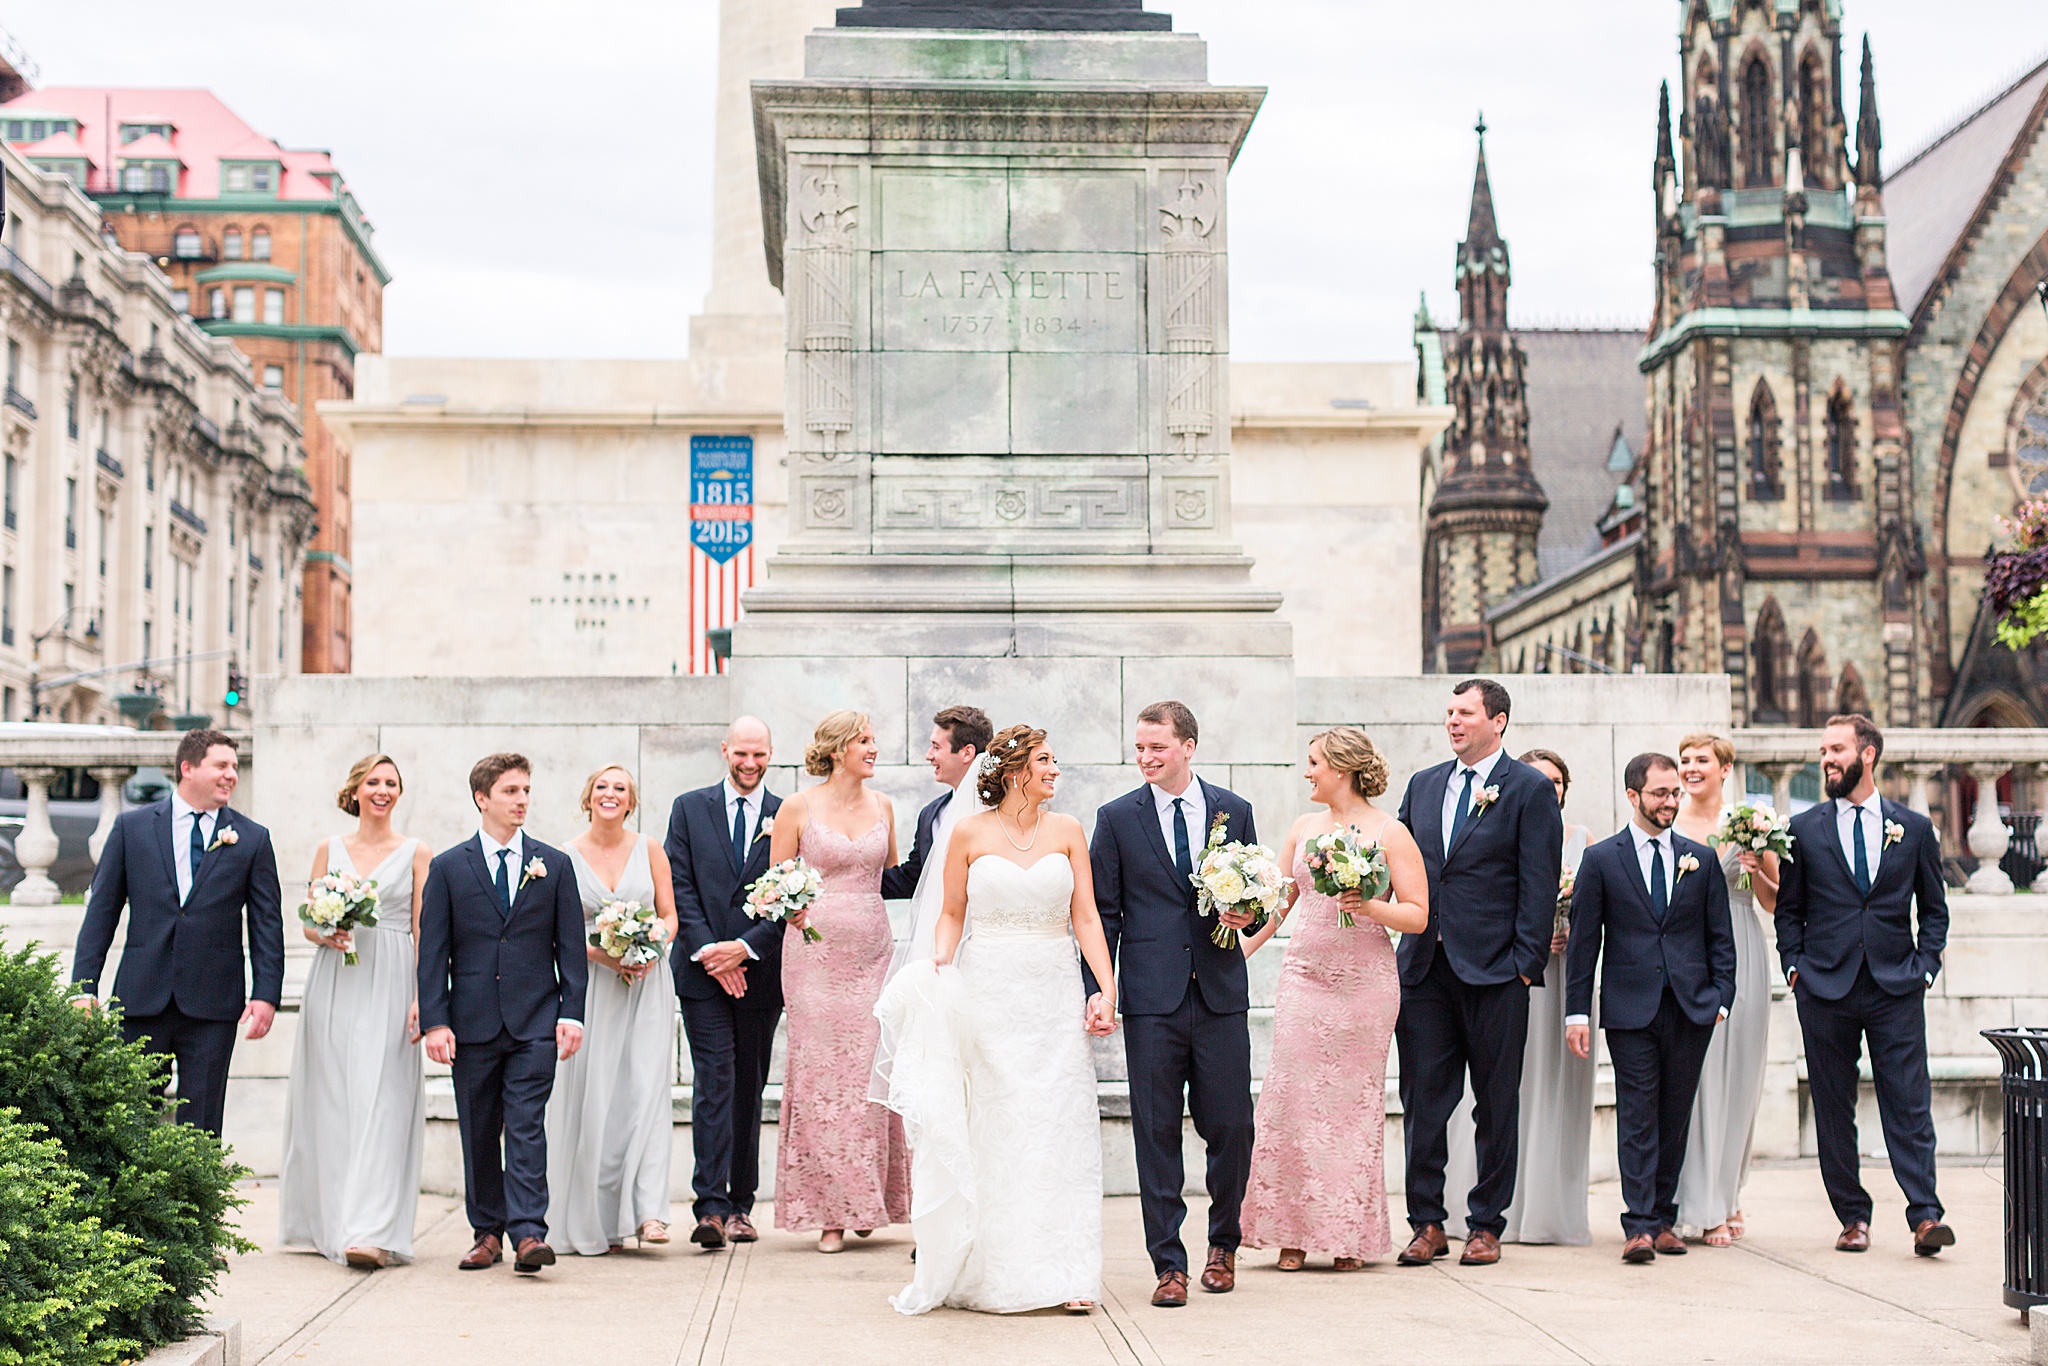 wedding portraits in the city photographed by MD wedding photographer Alexandra Mandato Photography